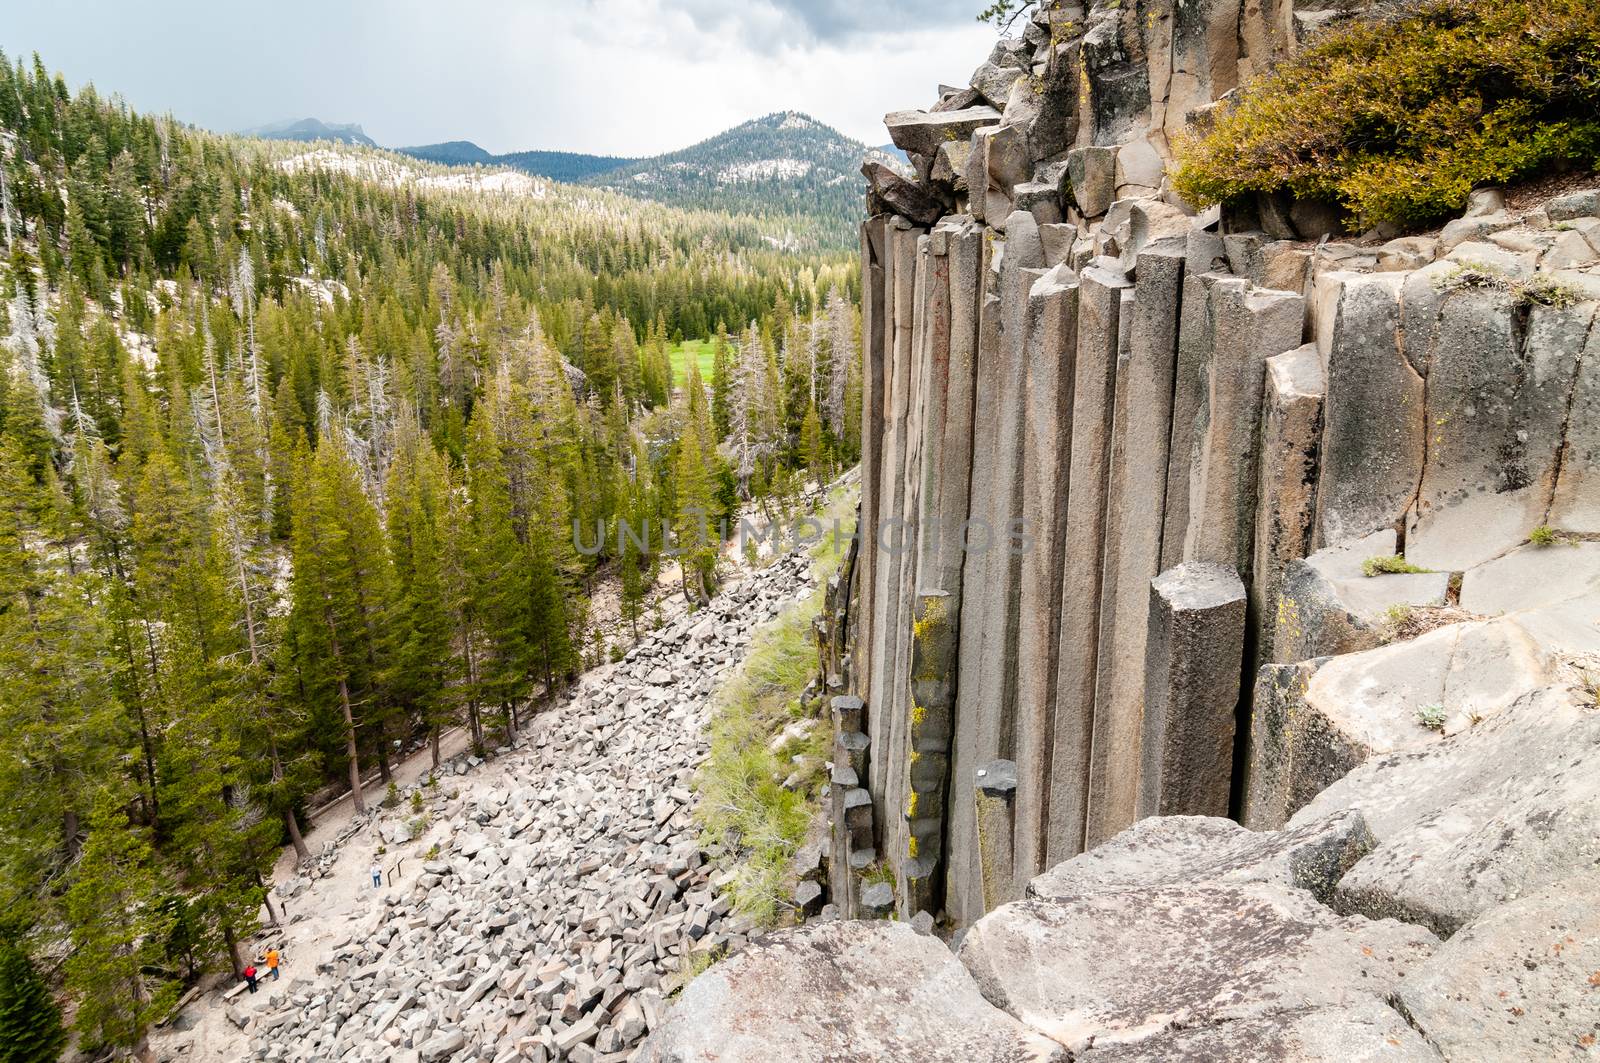 Hexagon basaltic columns seen from the top of Devils Postpile National Monument in Inyo National Forest, Ansel Adams Wilderness by Njean